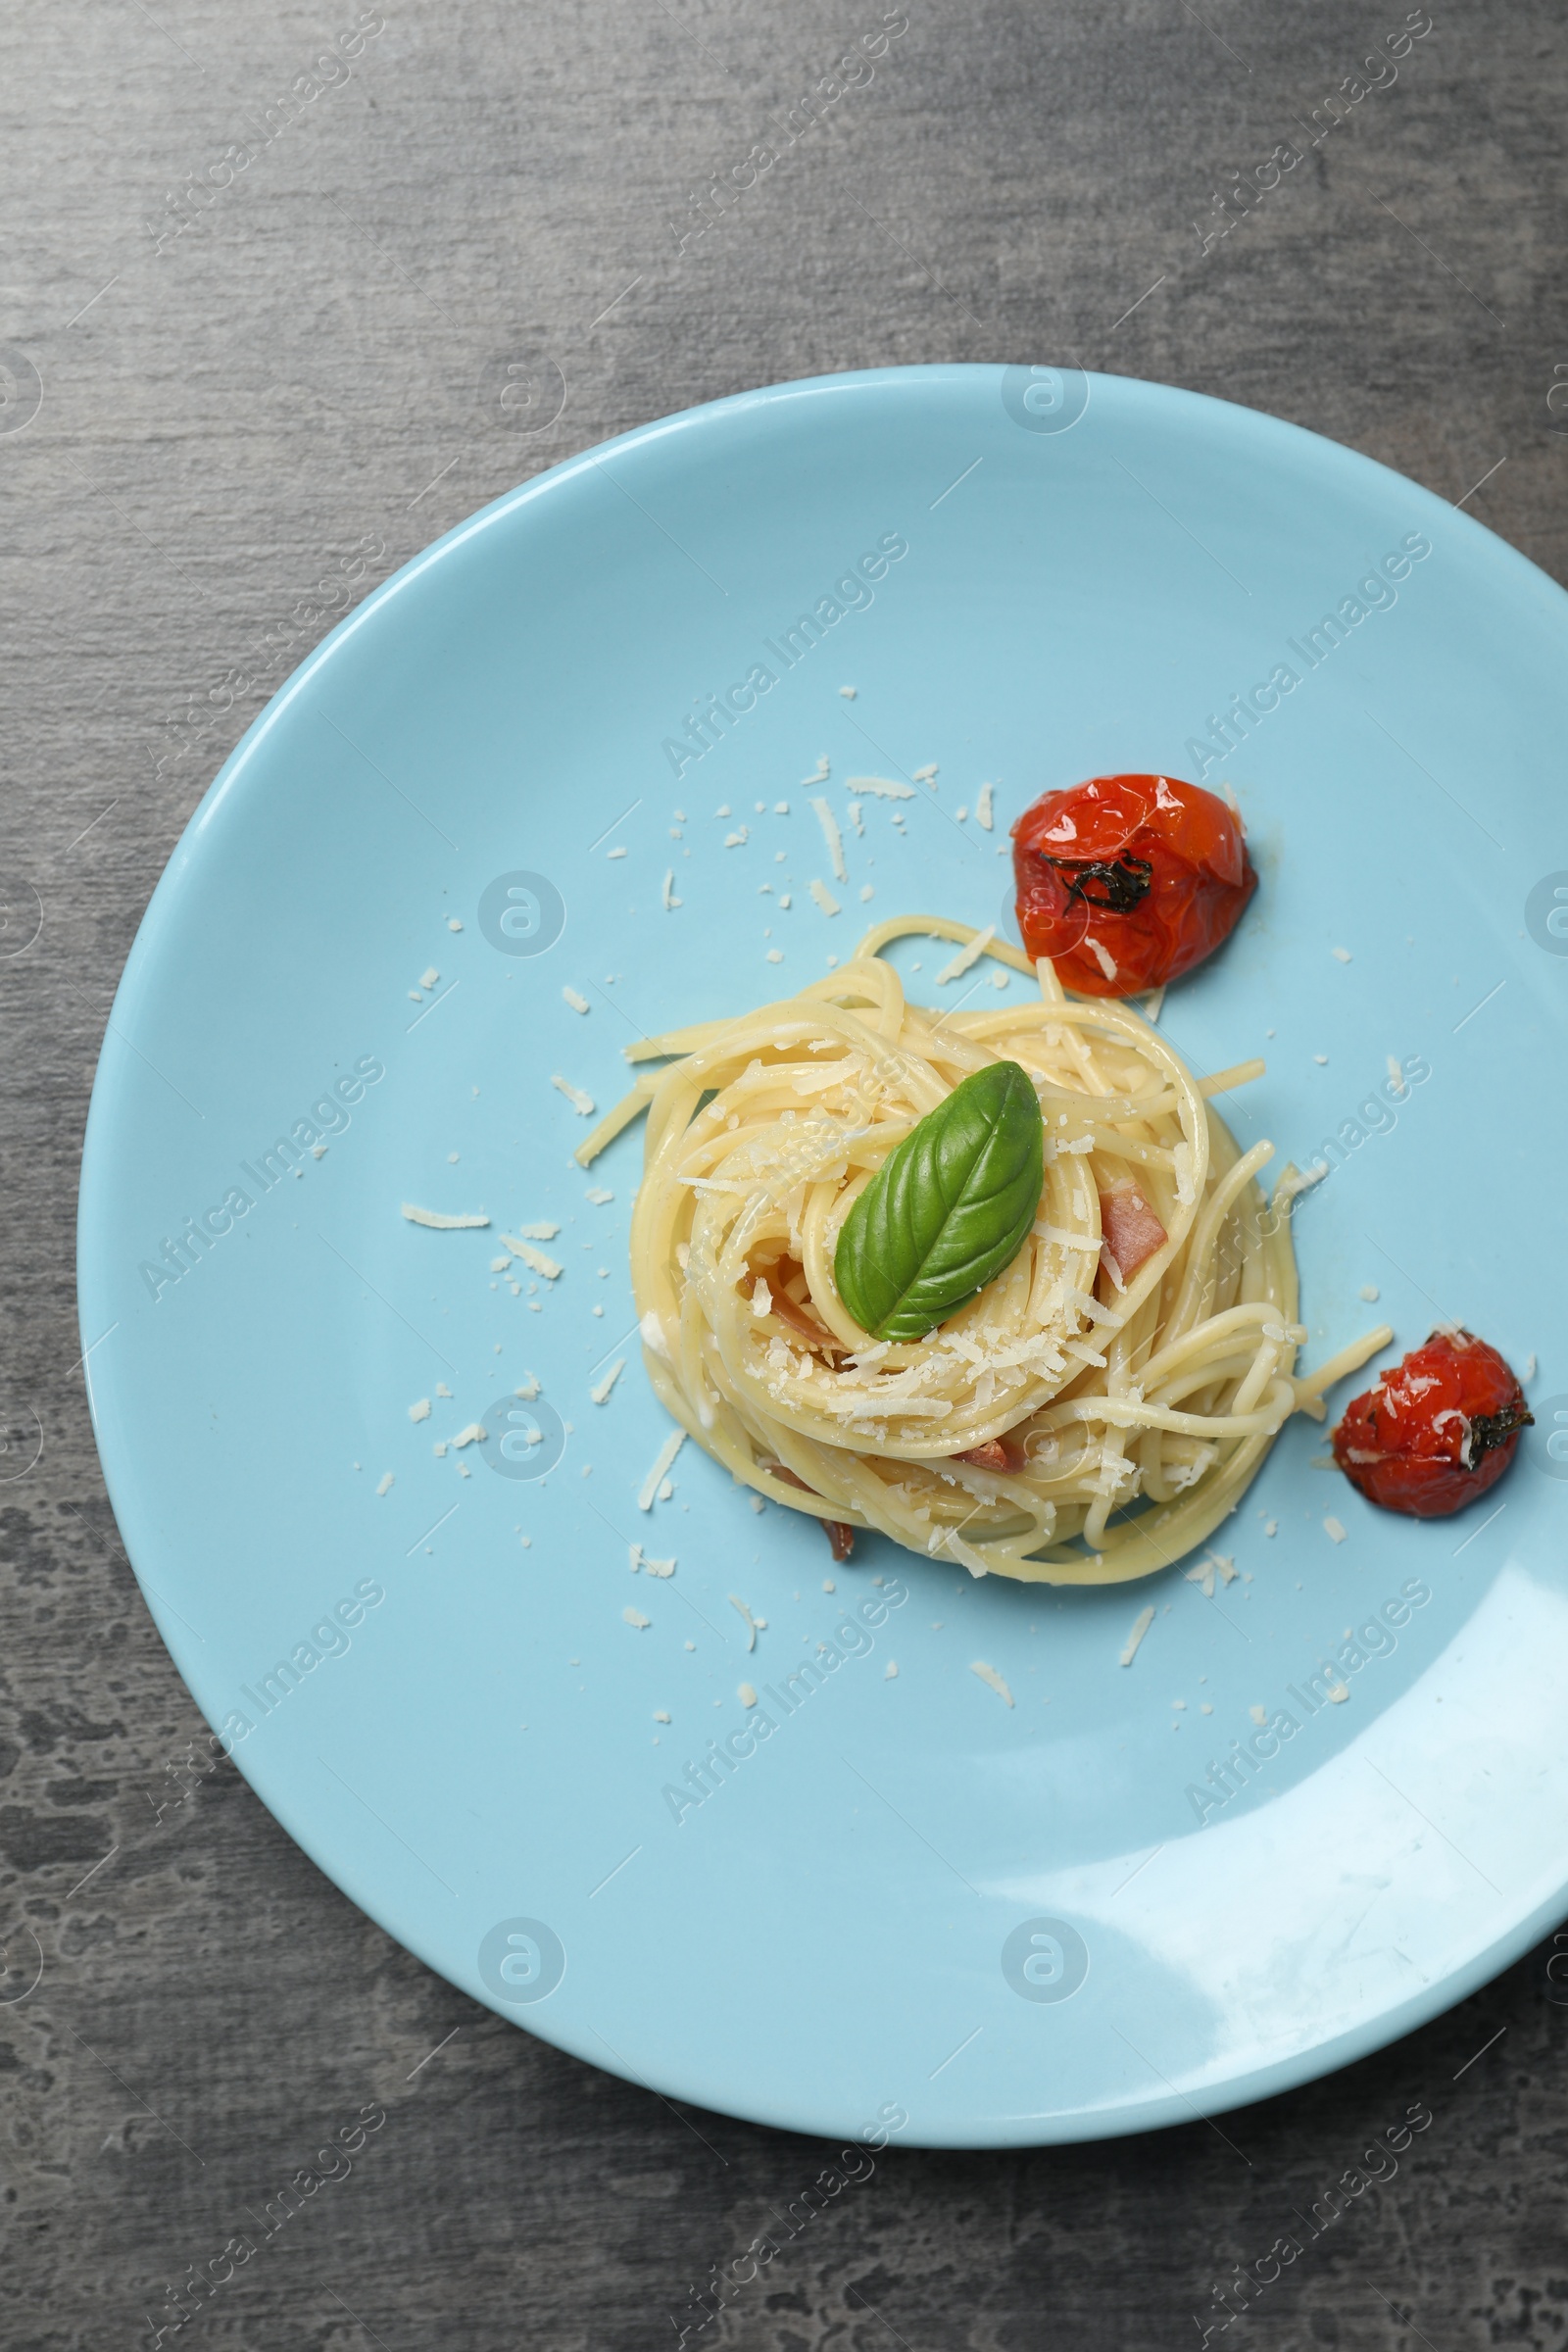 Photo of Tasty spaghetti with tomatoes and cheese on grey table, top view. Exquisite presentation of pasta dish